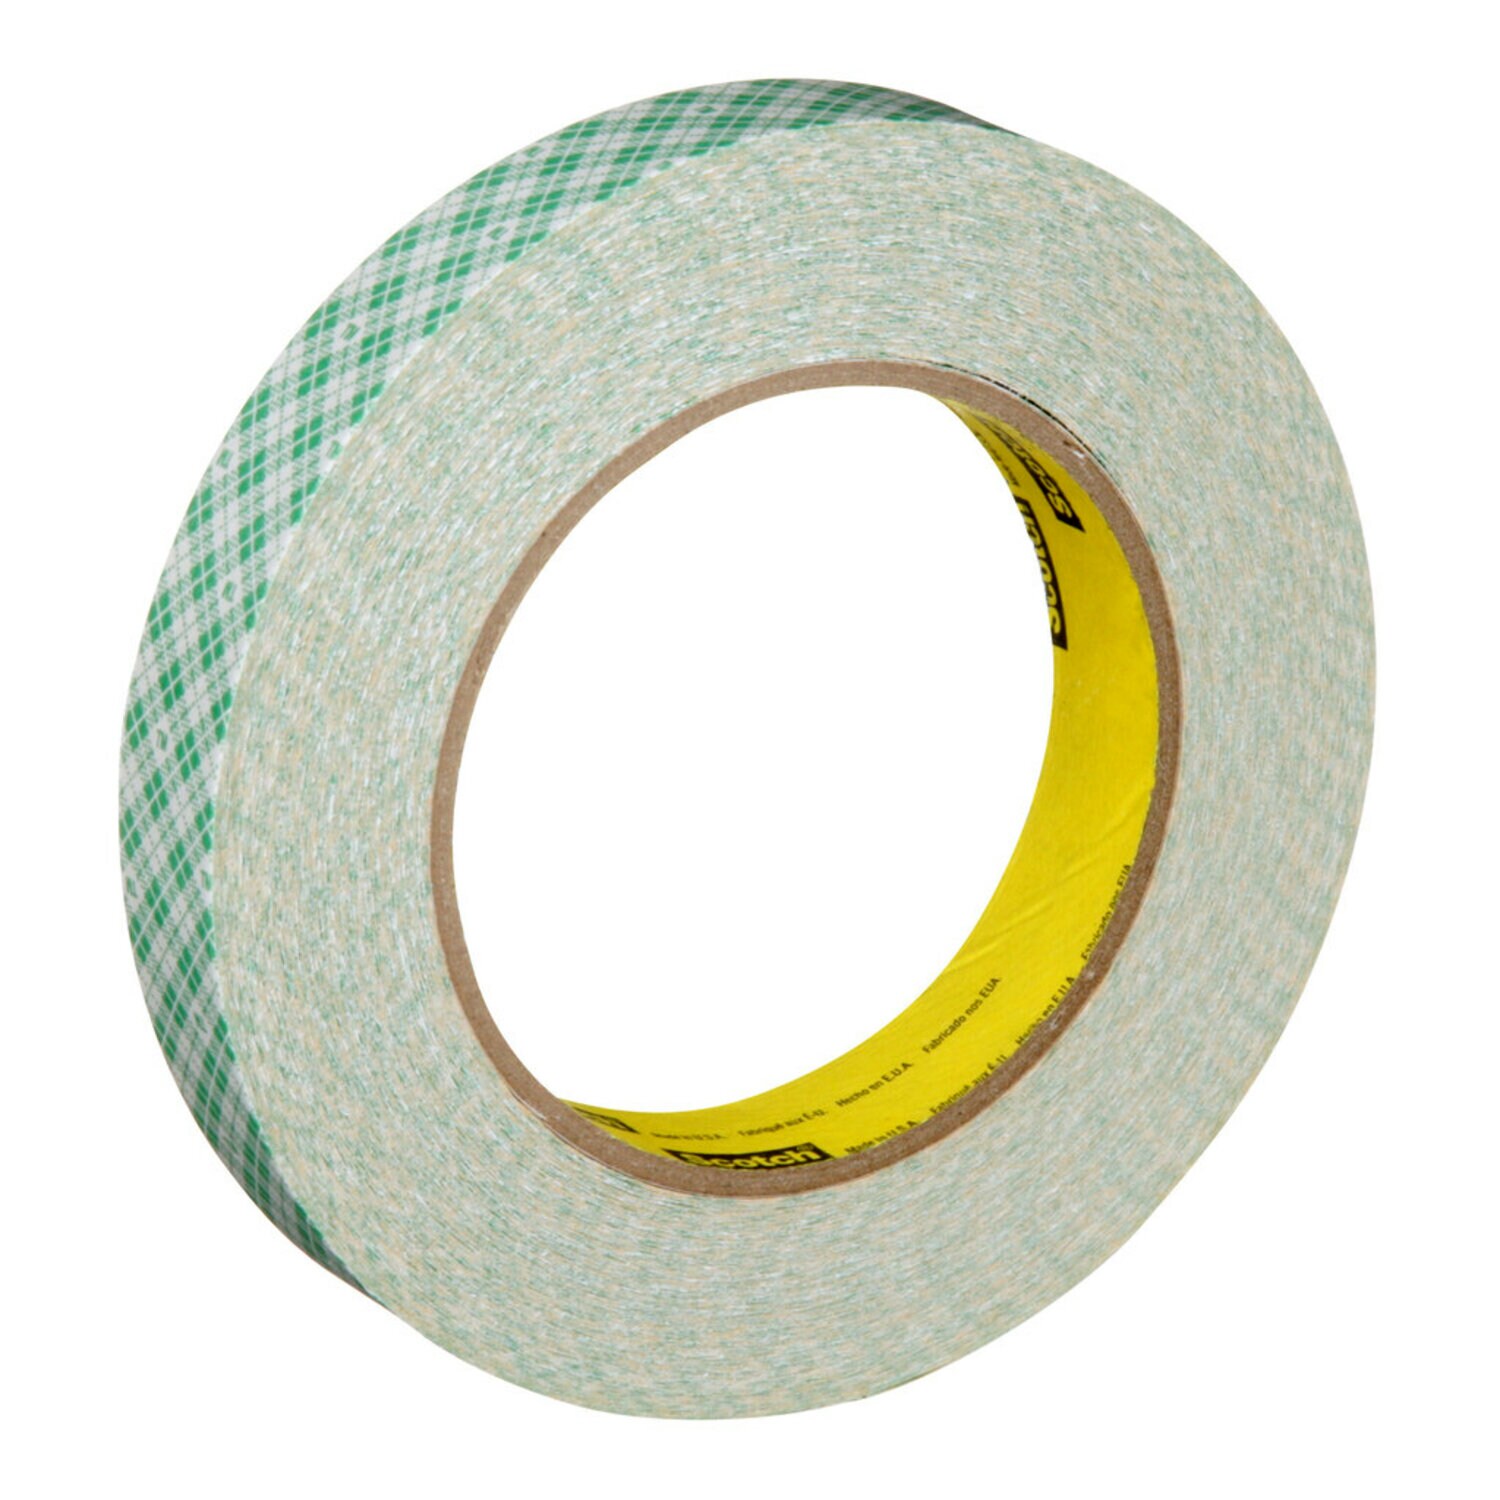 7000049273 - 3M Double Coated Paper Tape 410M, Natural, 3/4 in x 36 yd, 5 mil, 48
rolls per case